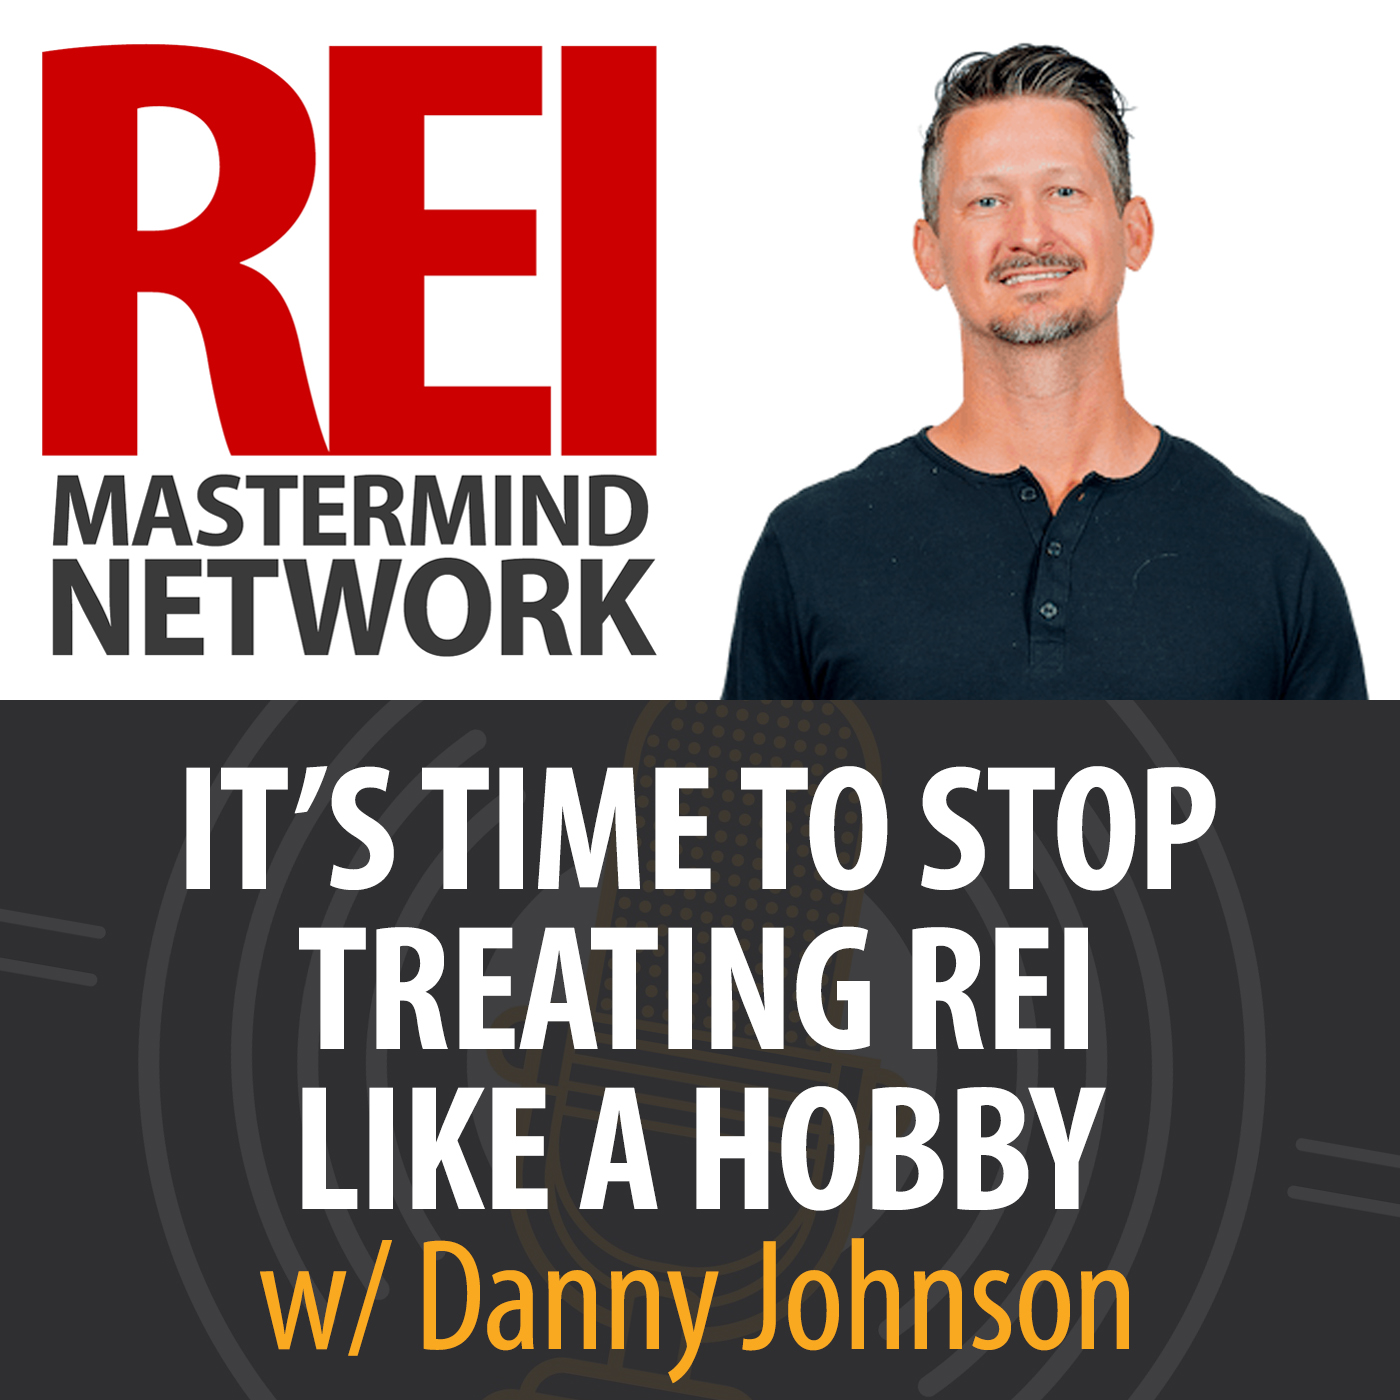 It's Time To Stop Treating Real Estate Investing as a Hobby with Danny Johnson Image